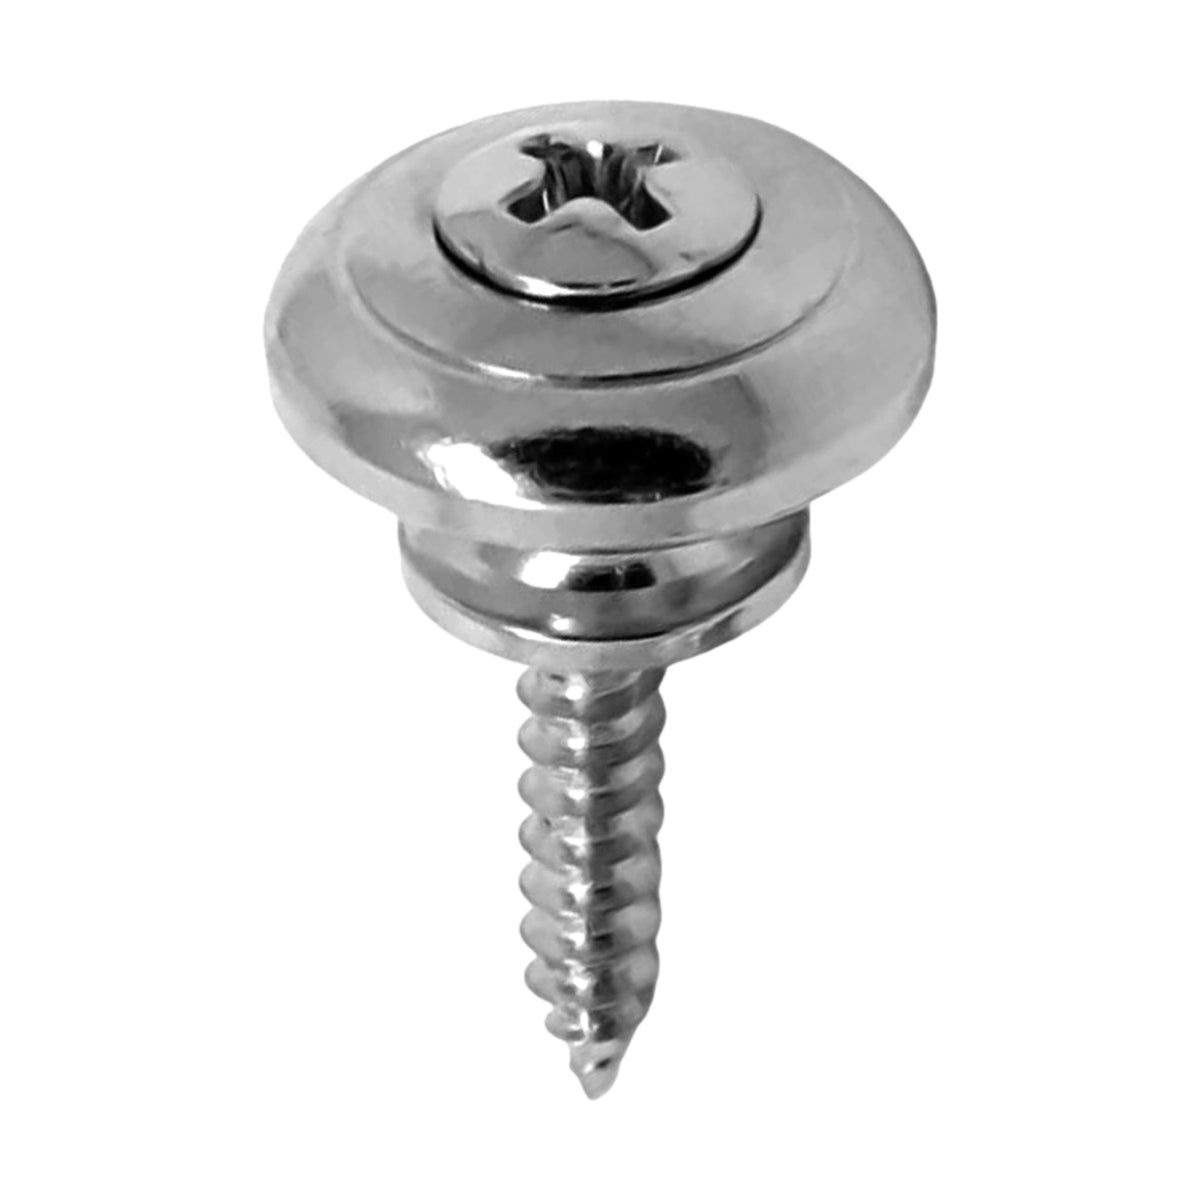 Eagle GPK5 End Pin Replacement for Guitar Nickel